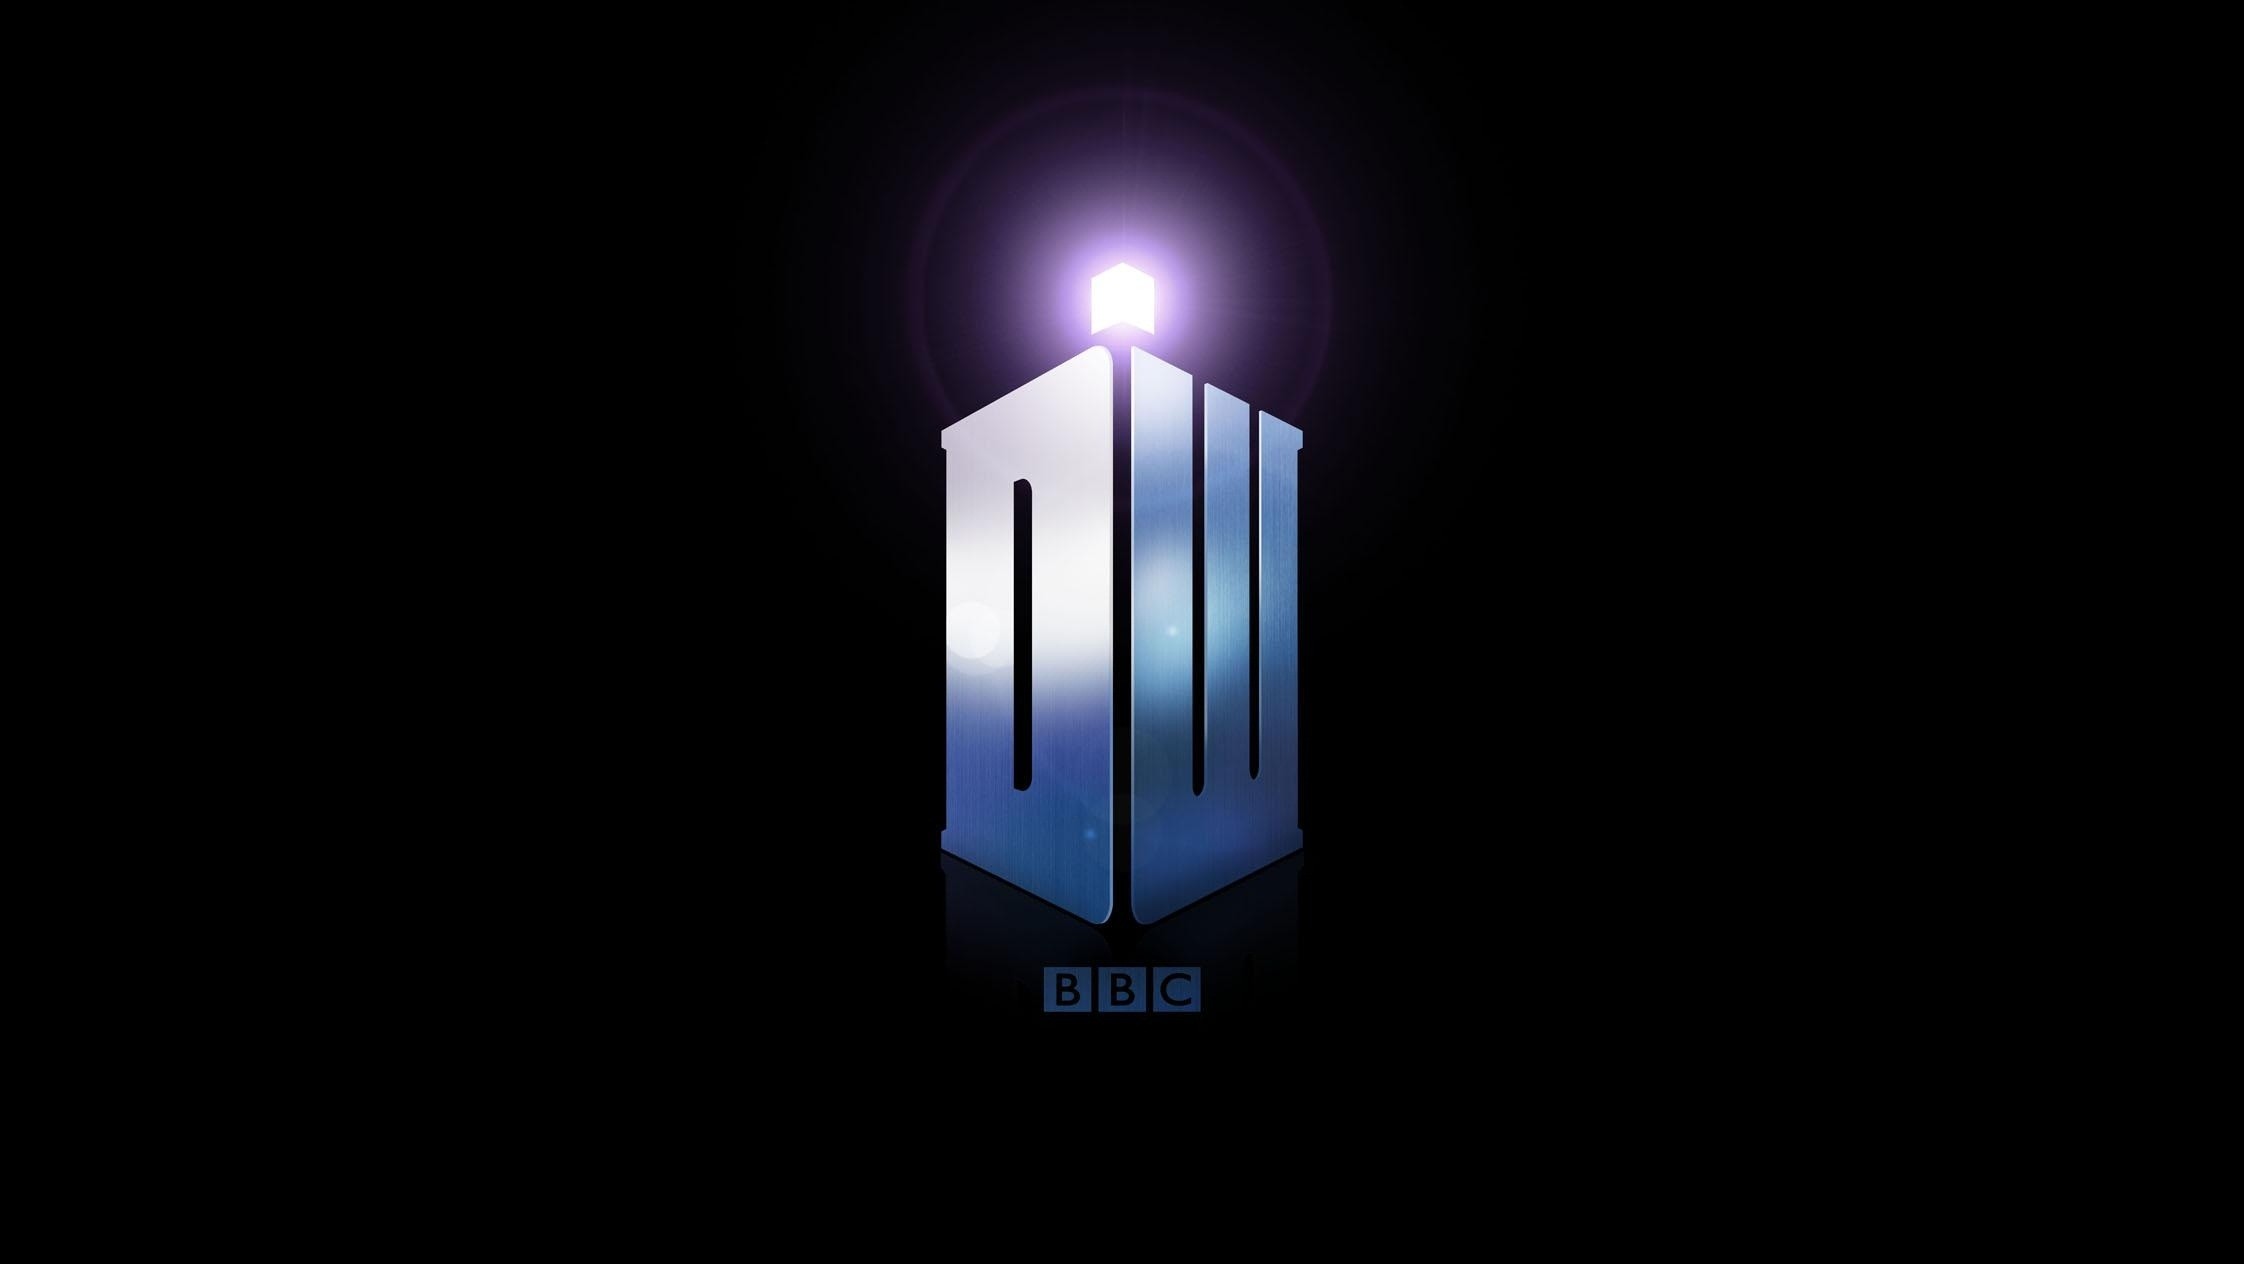 2244x1264 More recently, there's the DW logo ...